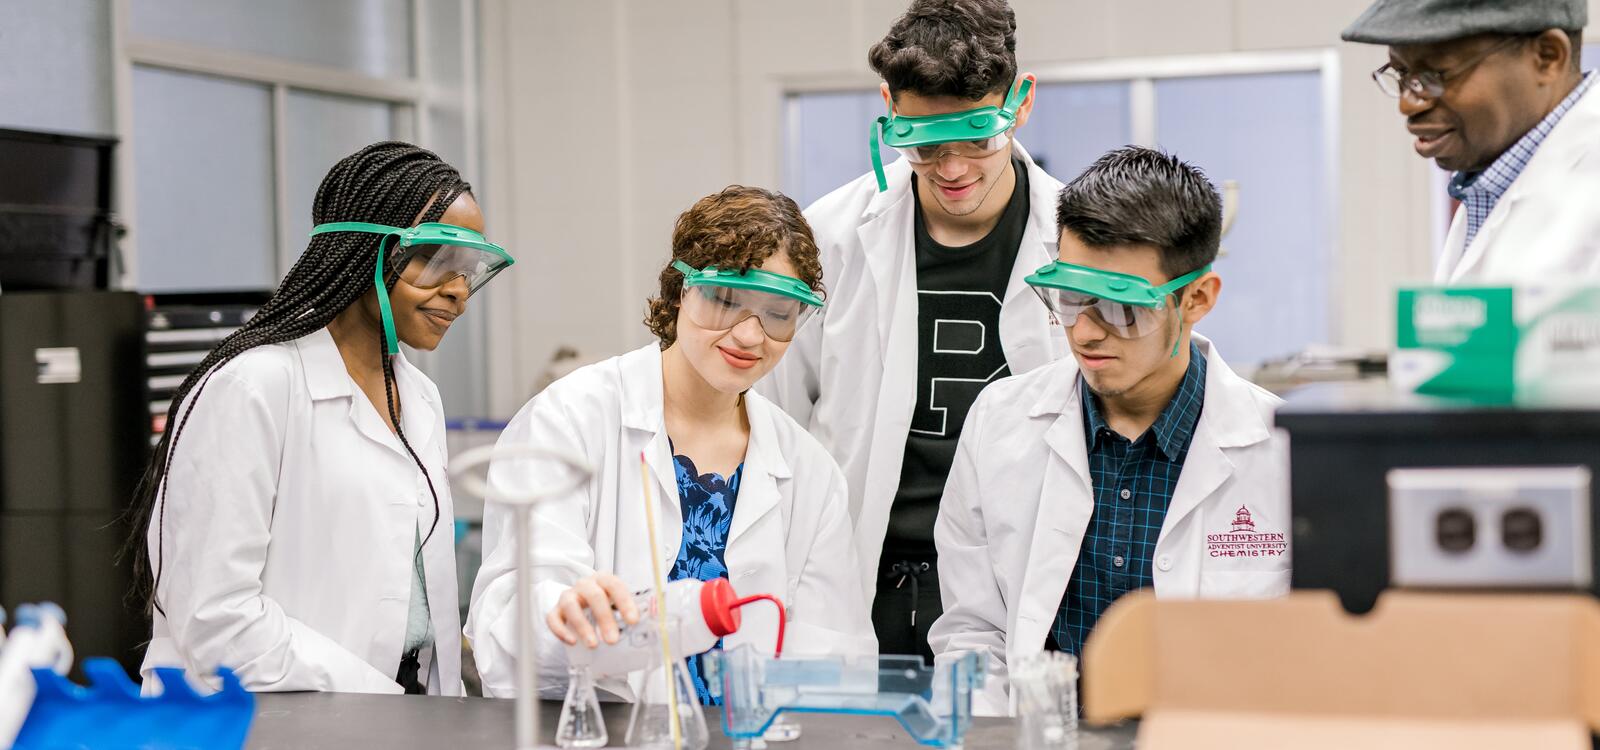 with help from their professor, three students, dressed in white lab coats and goggles, sit around and another student conduct an experiment. 